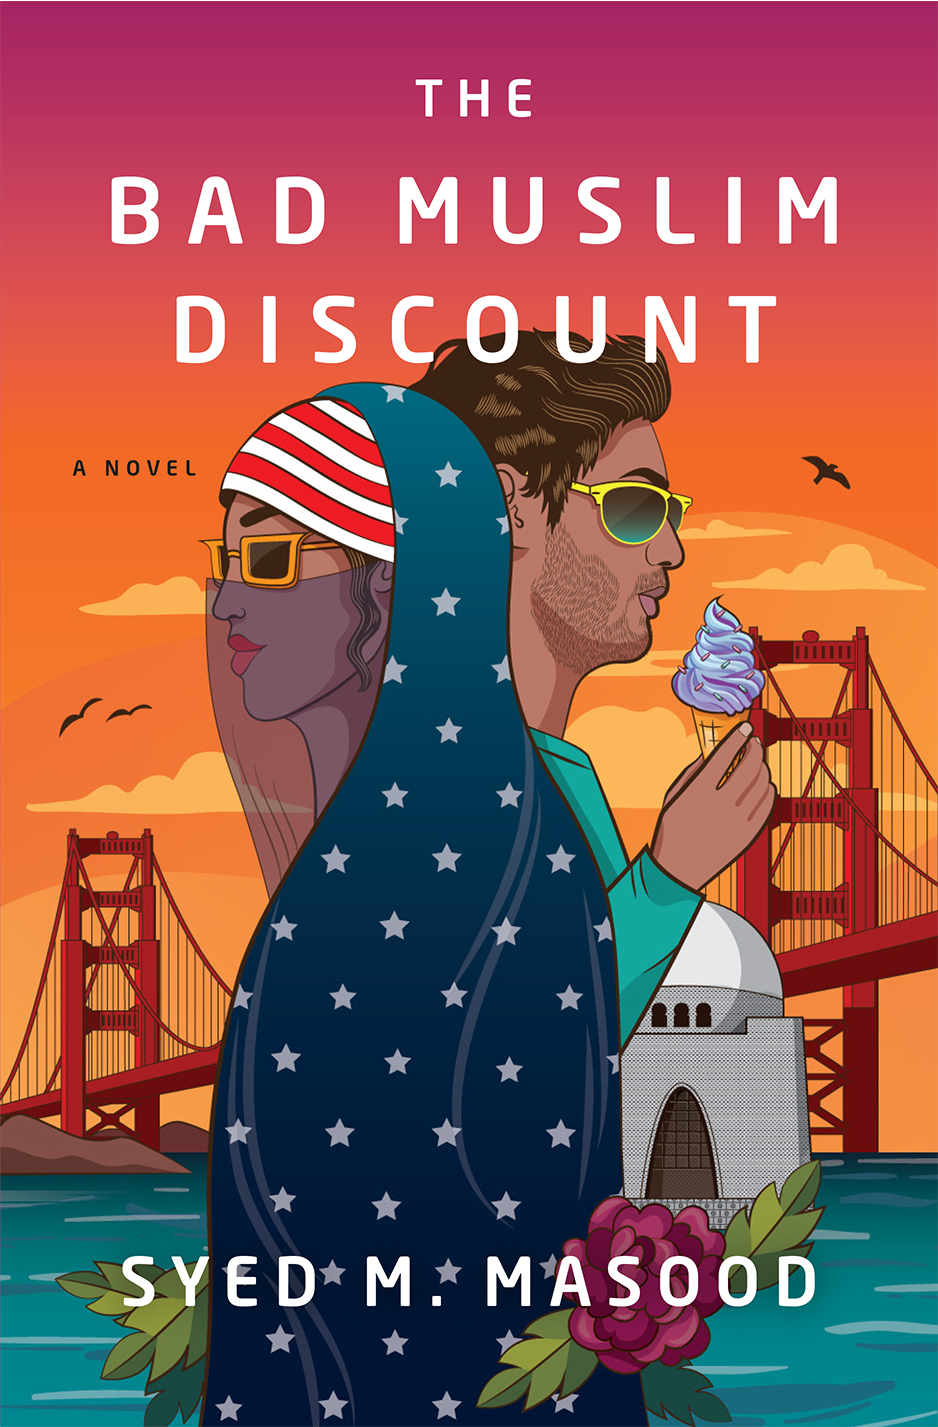 The Bad Muslim Discount By Syed M. Masood